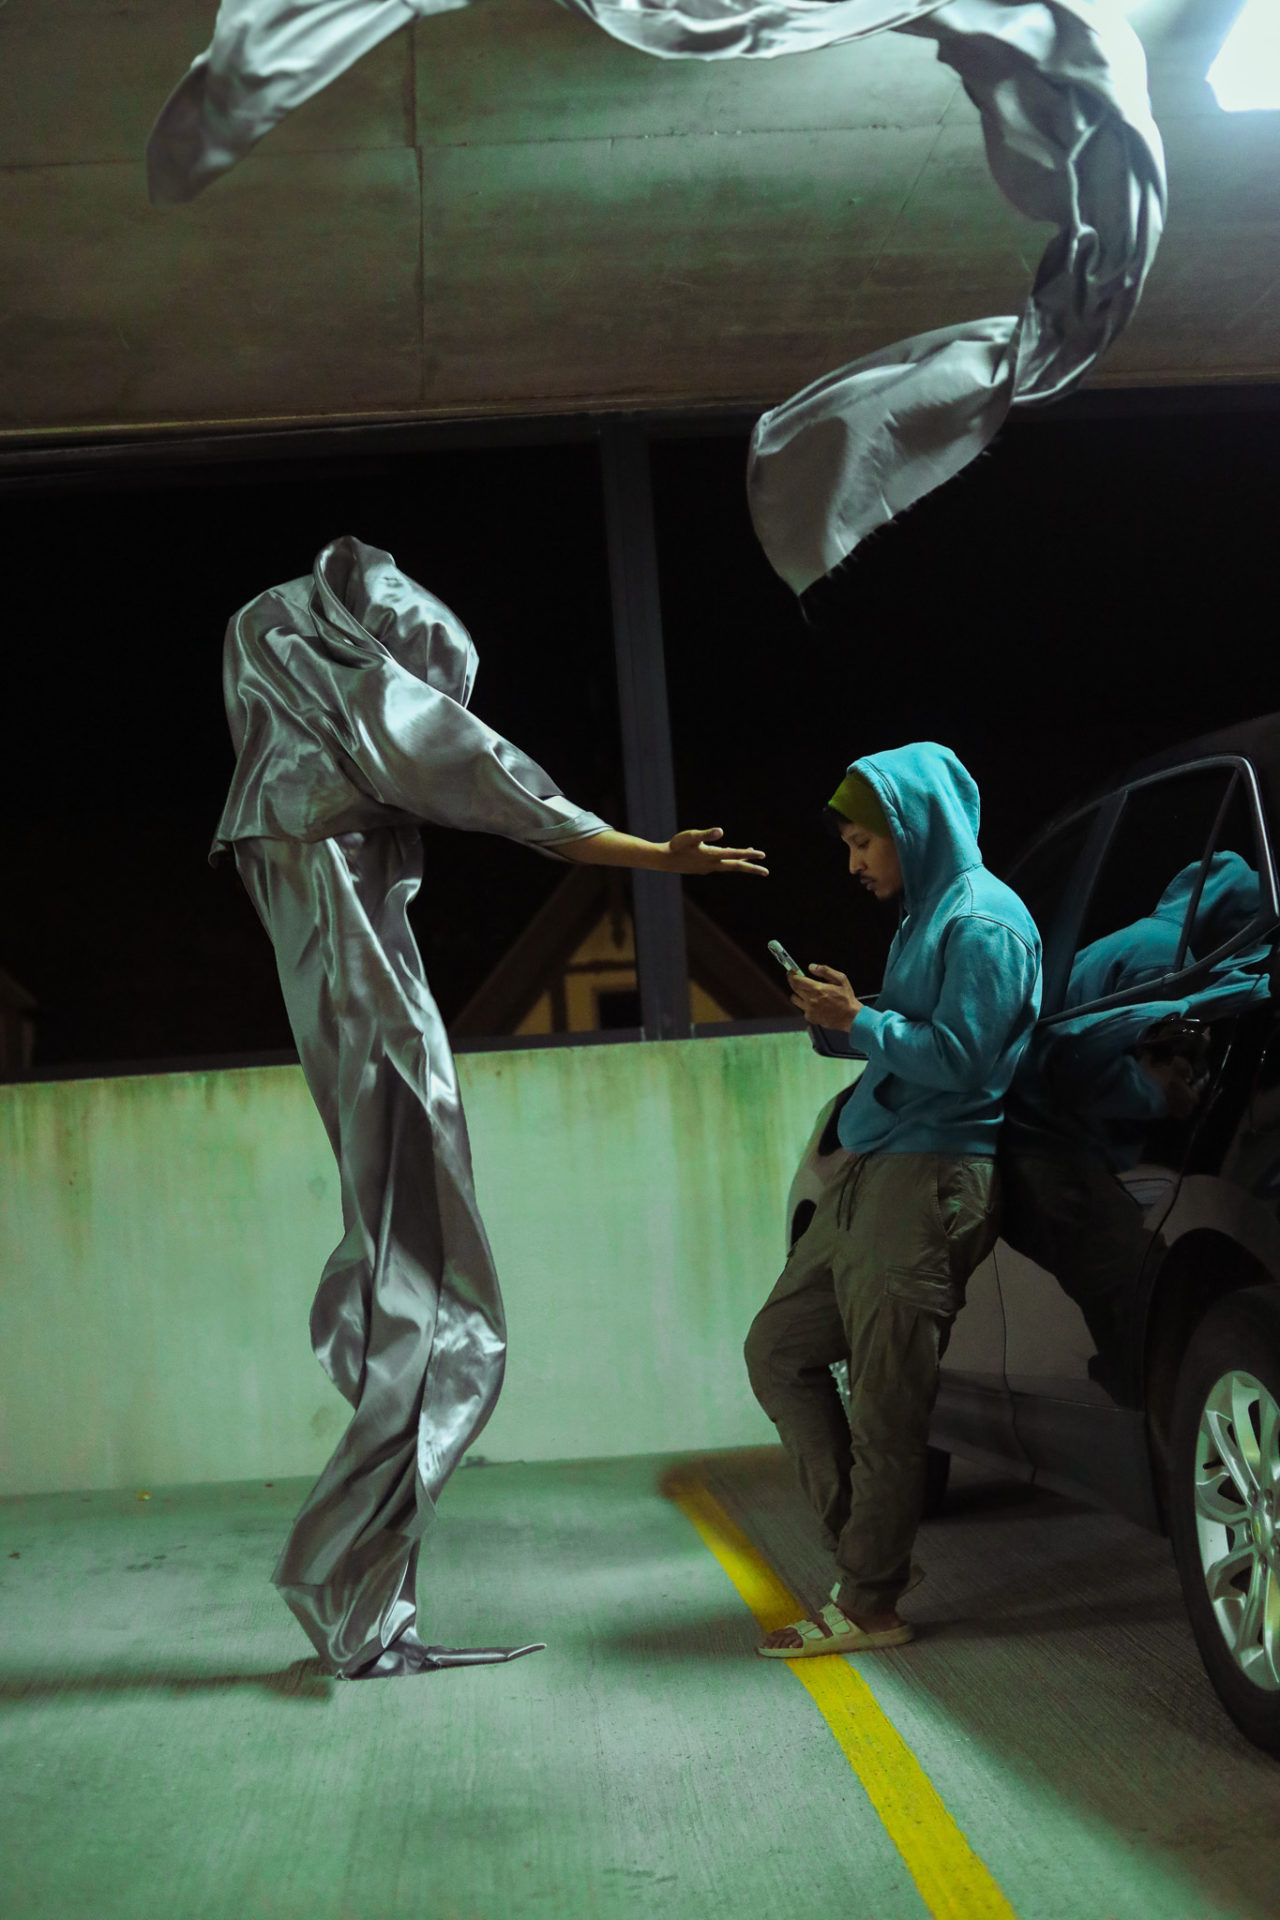 Marcus Flinn stands in a parking garage leaning against a car while on his phone. There is a large figure looming over him made up of silver fabric with an arm extended towards him. 